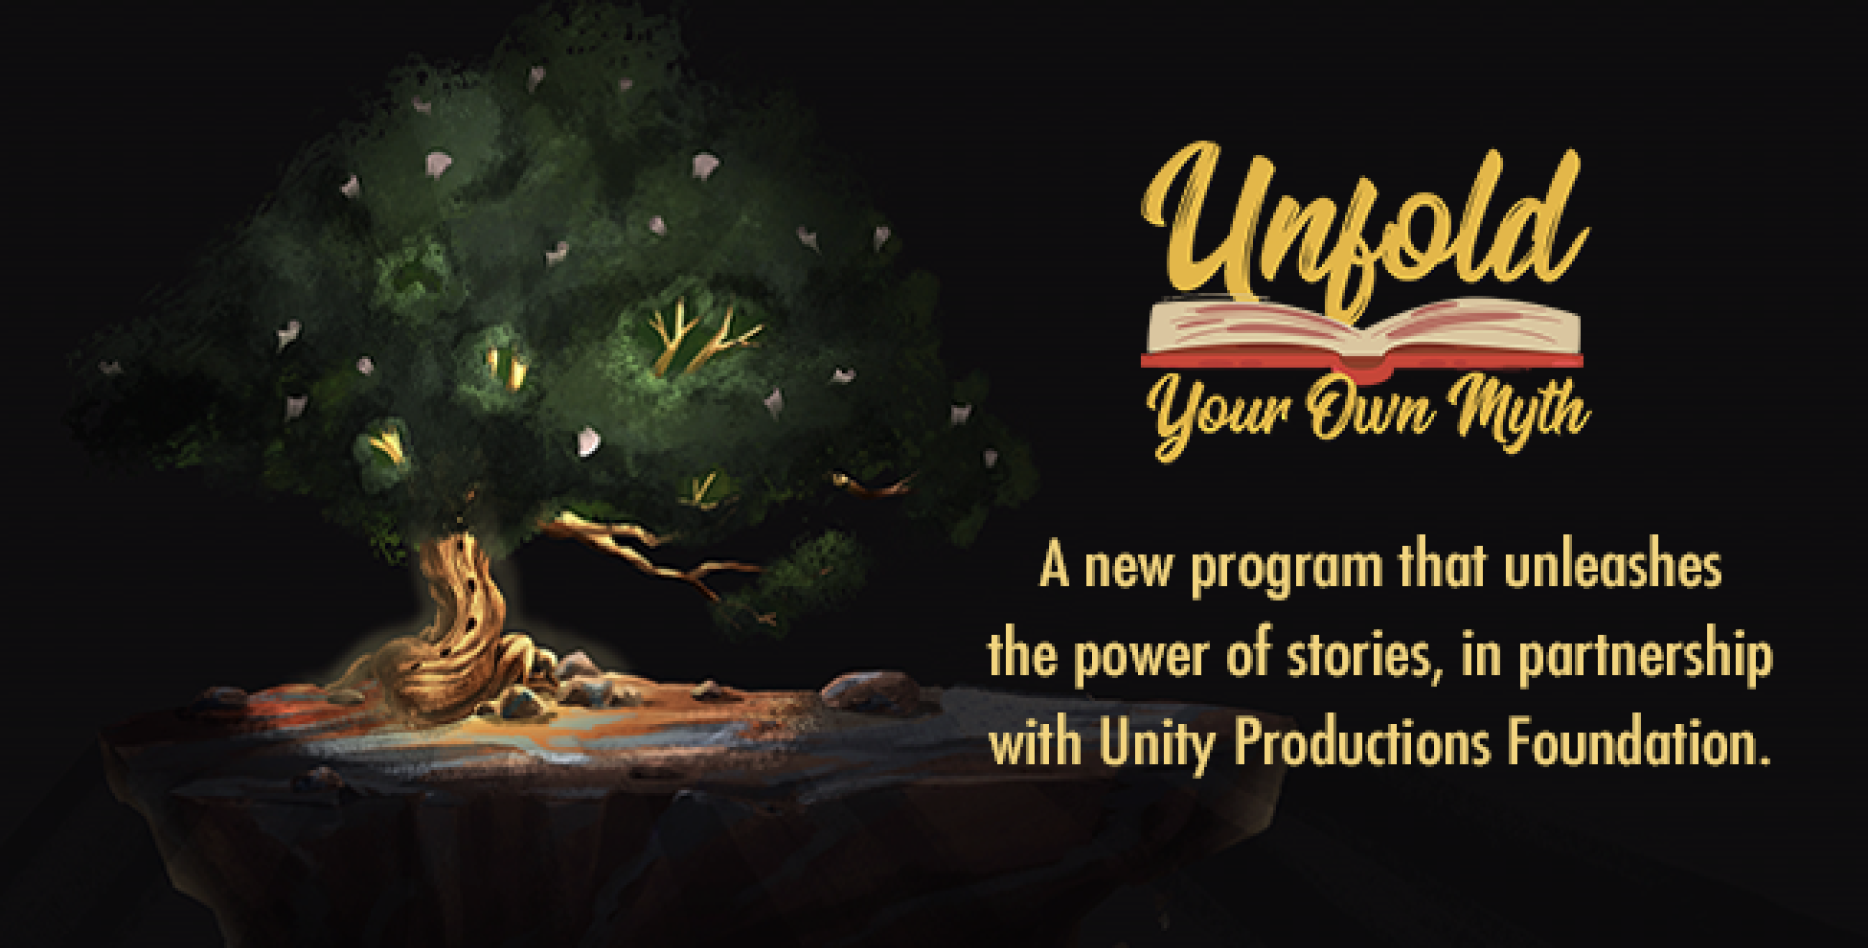 A new program that unleashes the power of stories, in partnership with Unity Productions Foundation